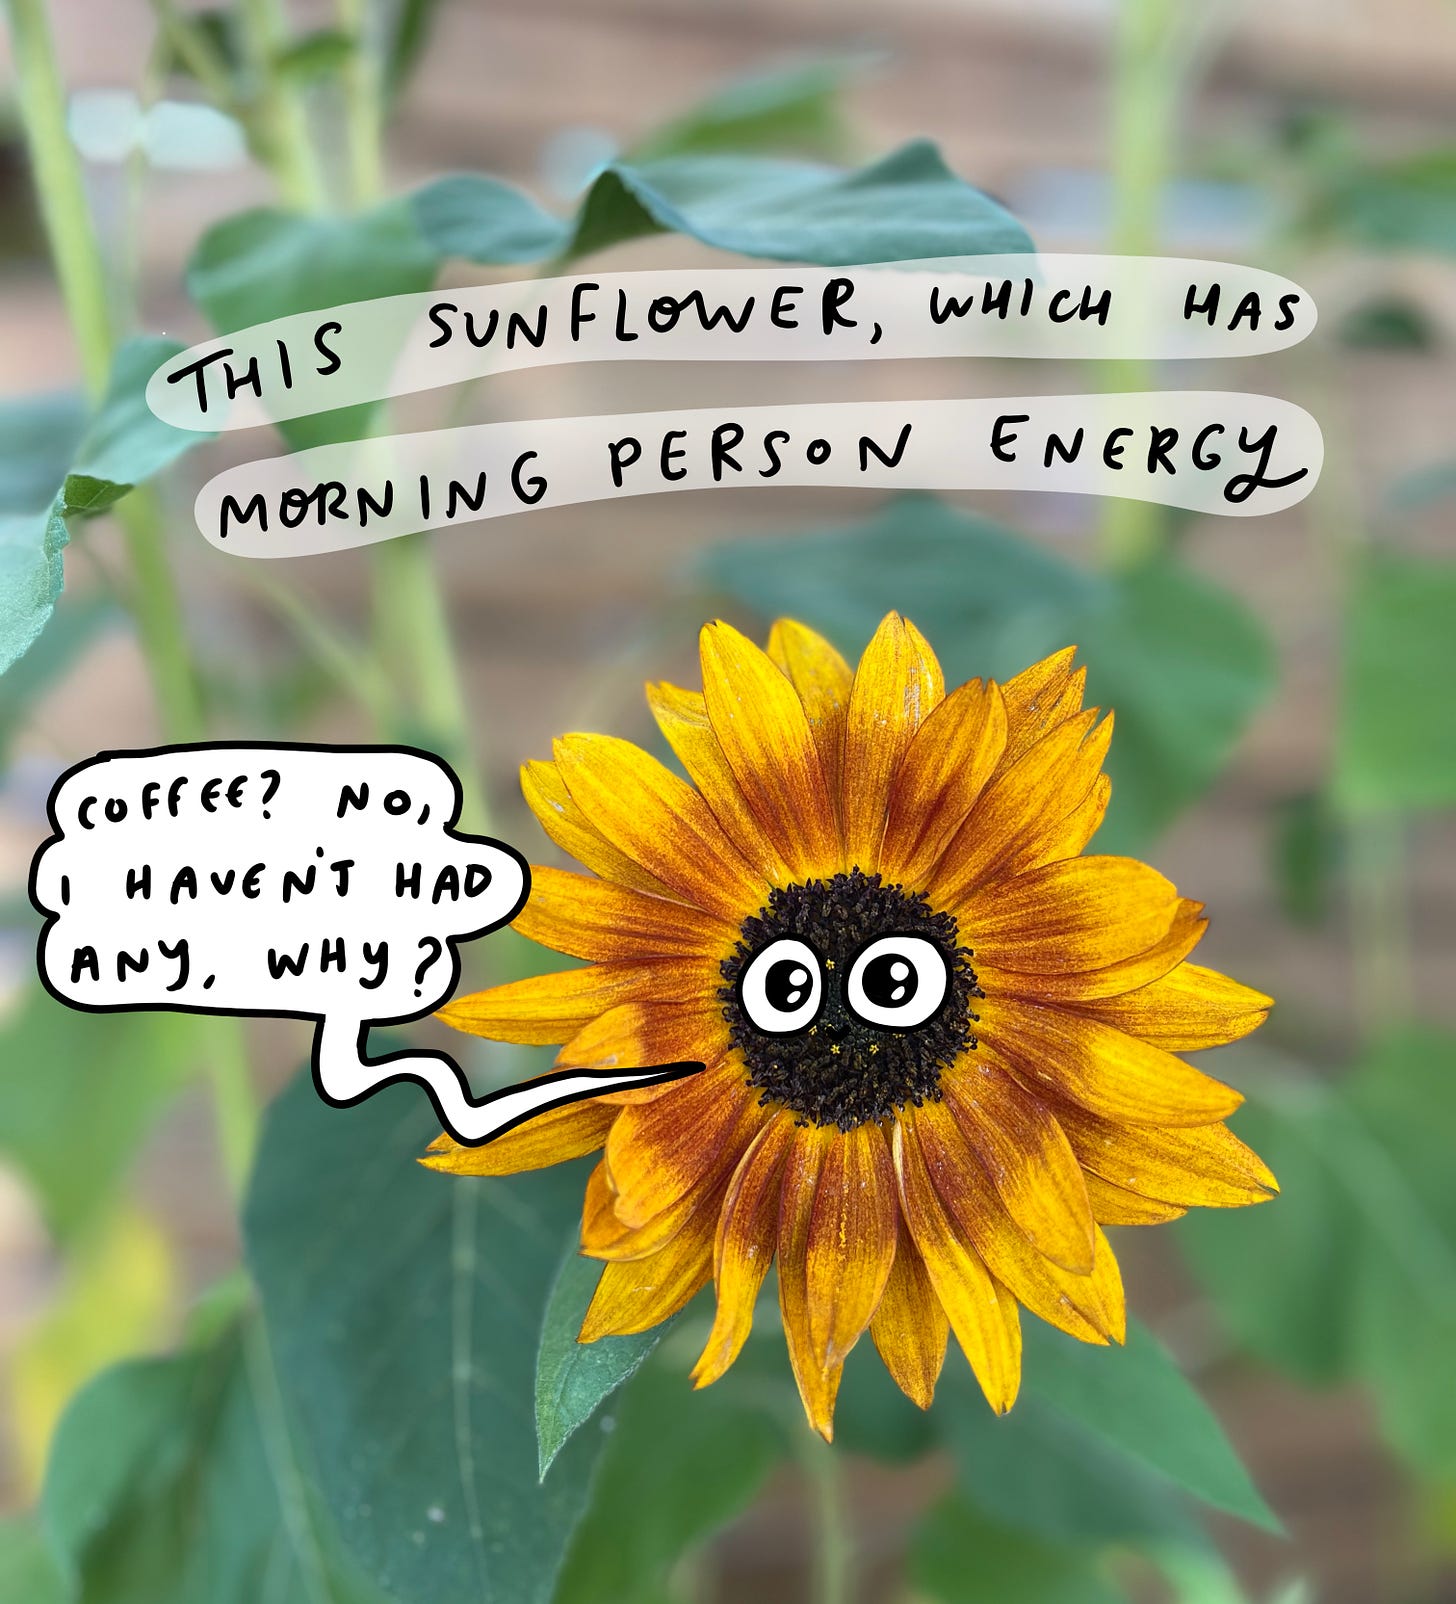 photo of a sunflower, which is saying "coffee? no I haven't had any, why?"